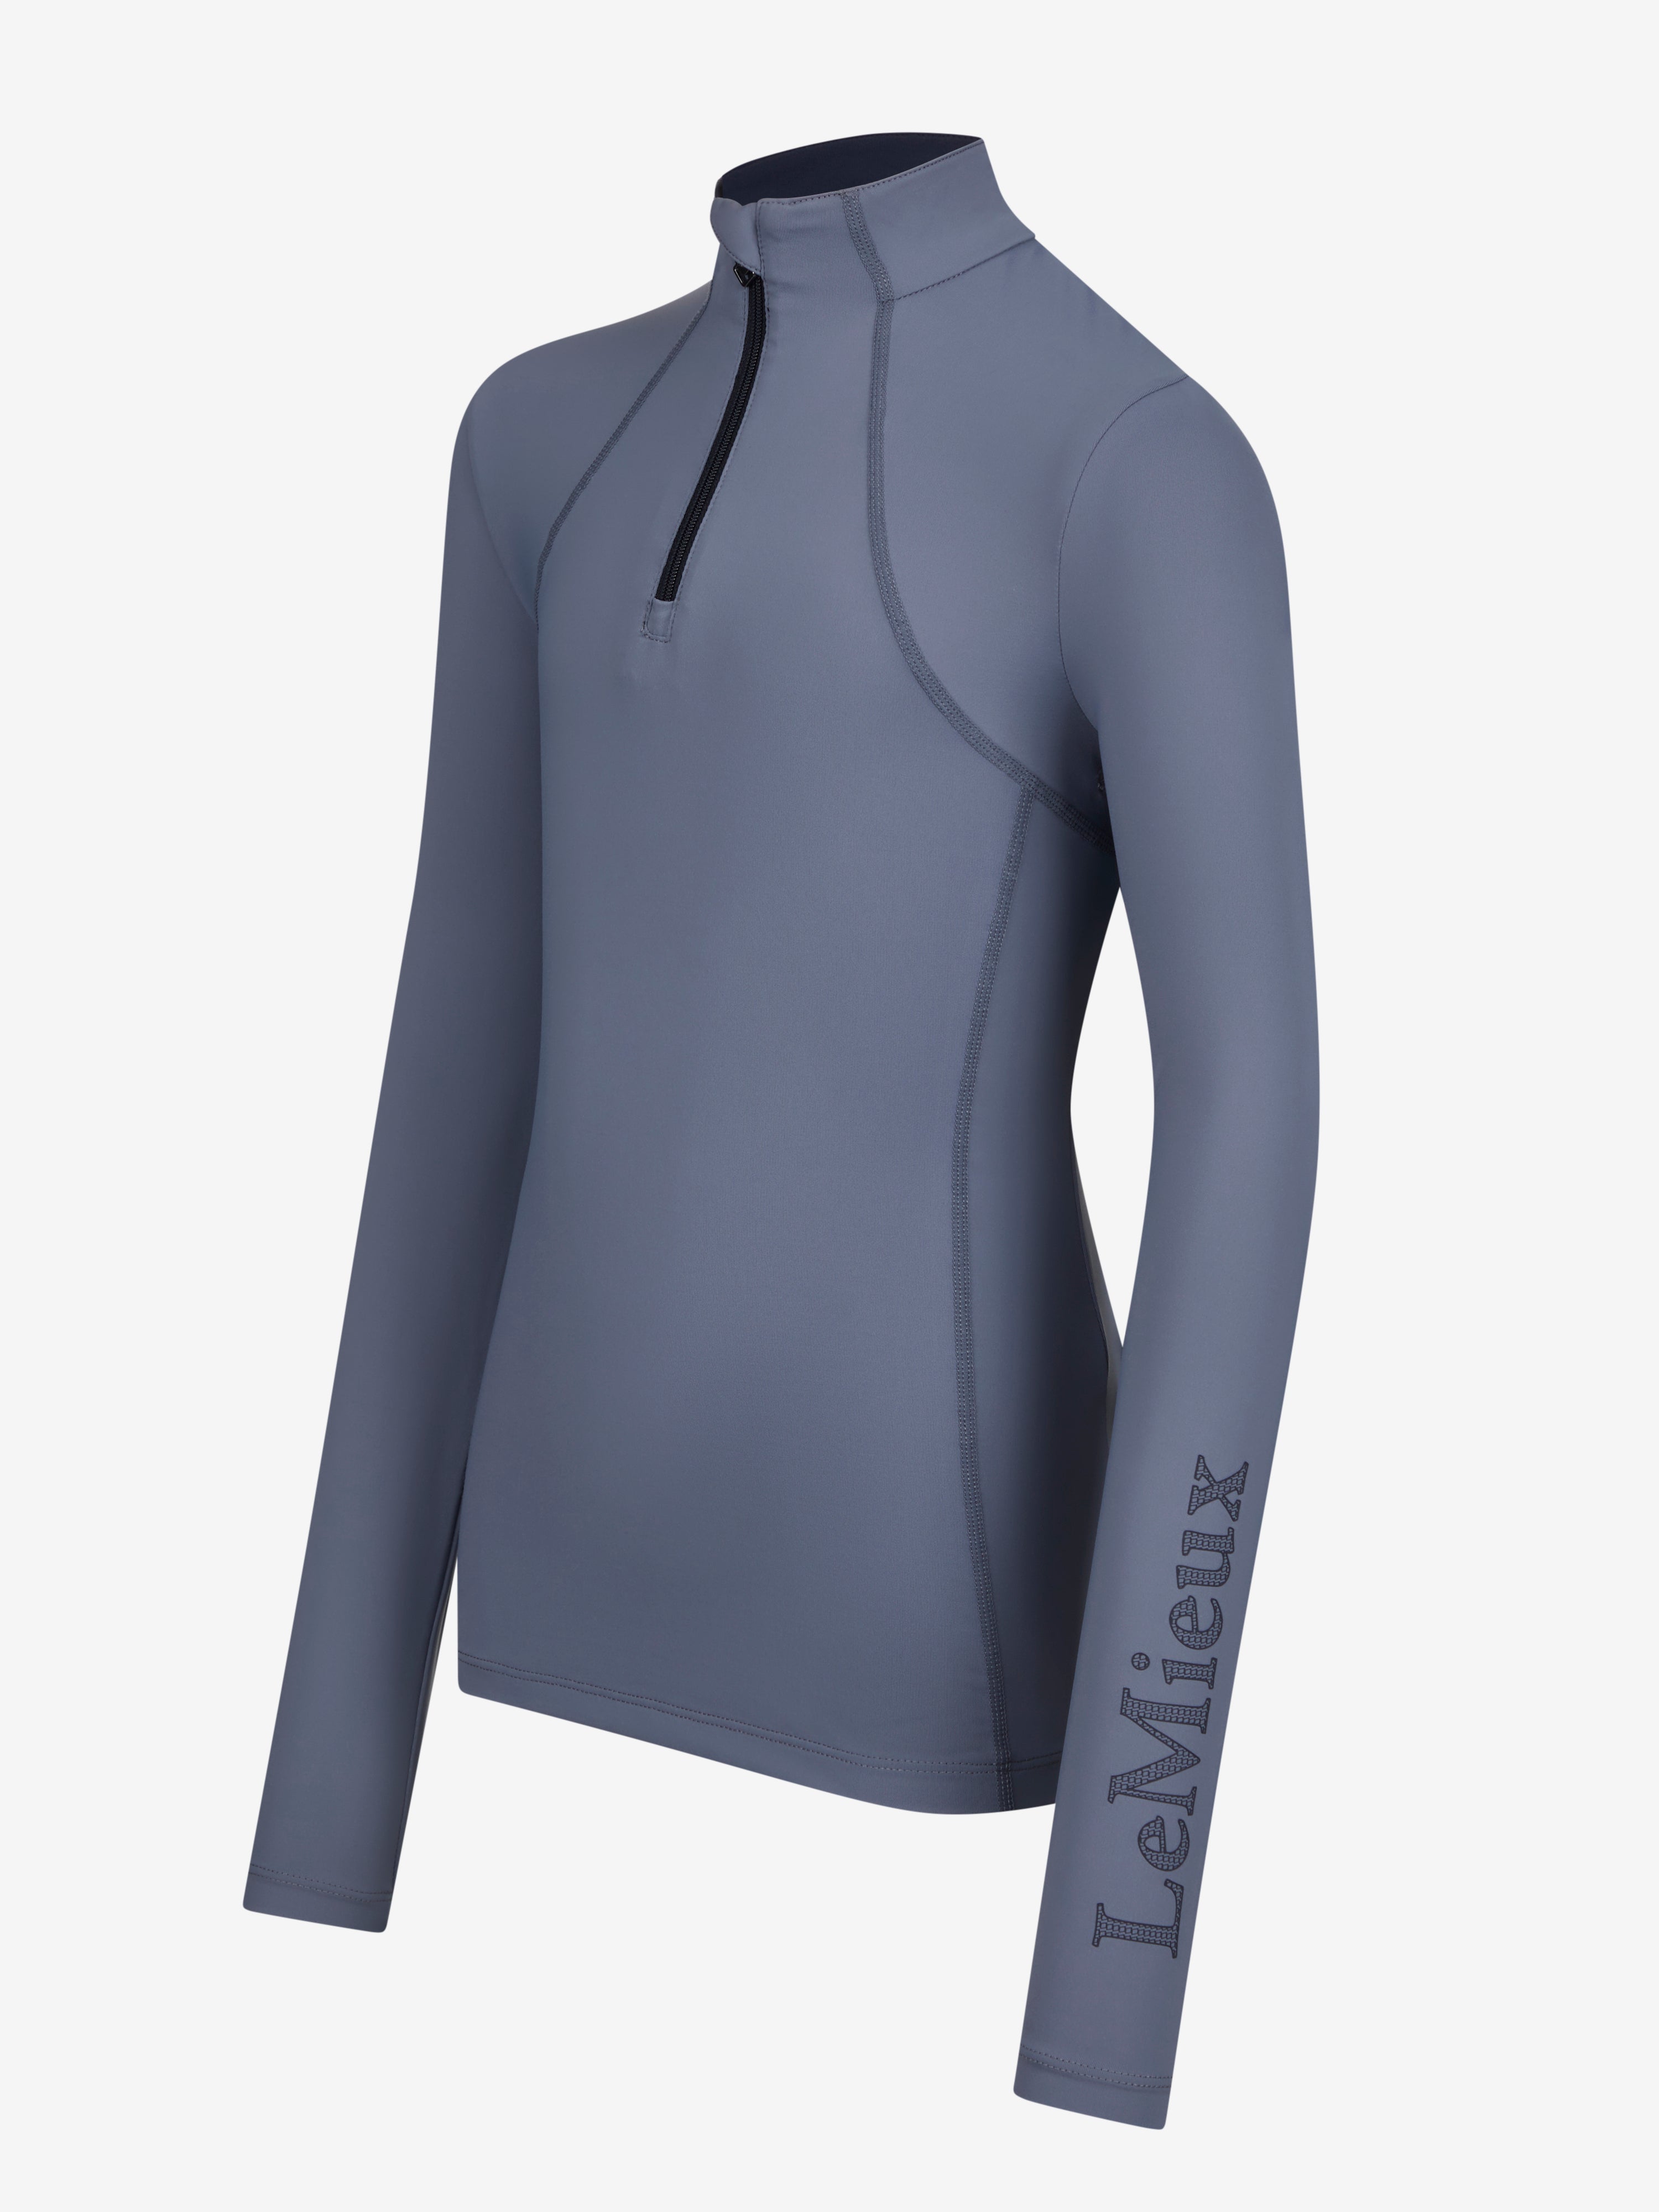 LeMieux Young Rider Base Layer